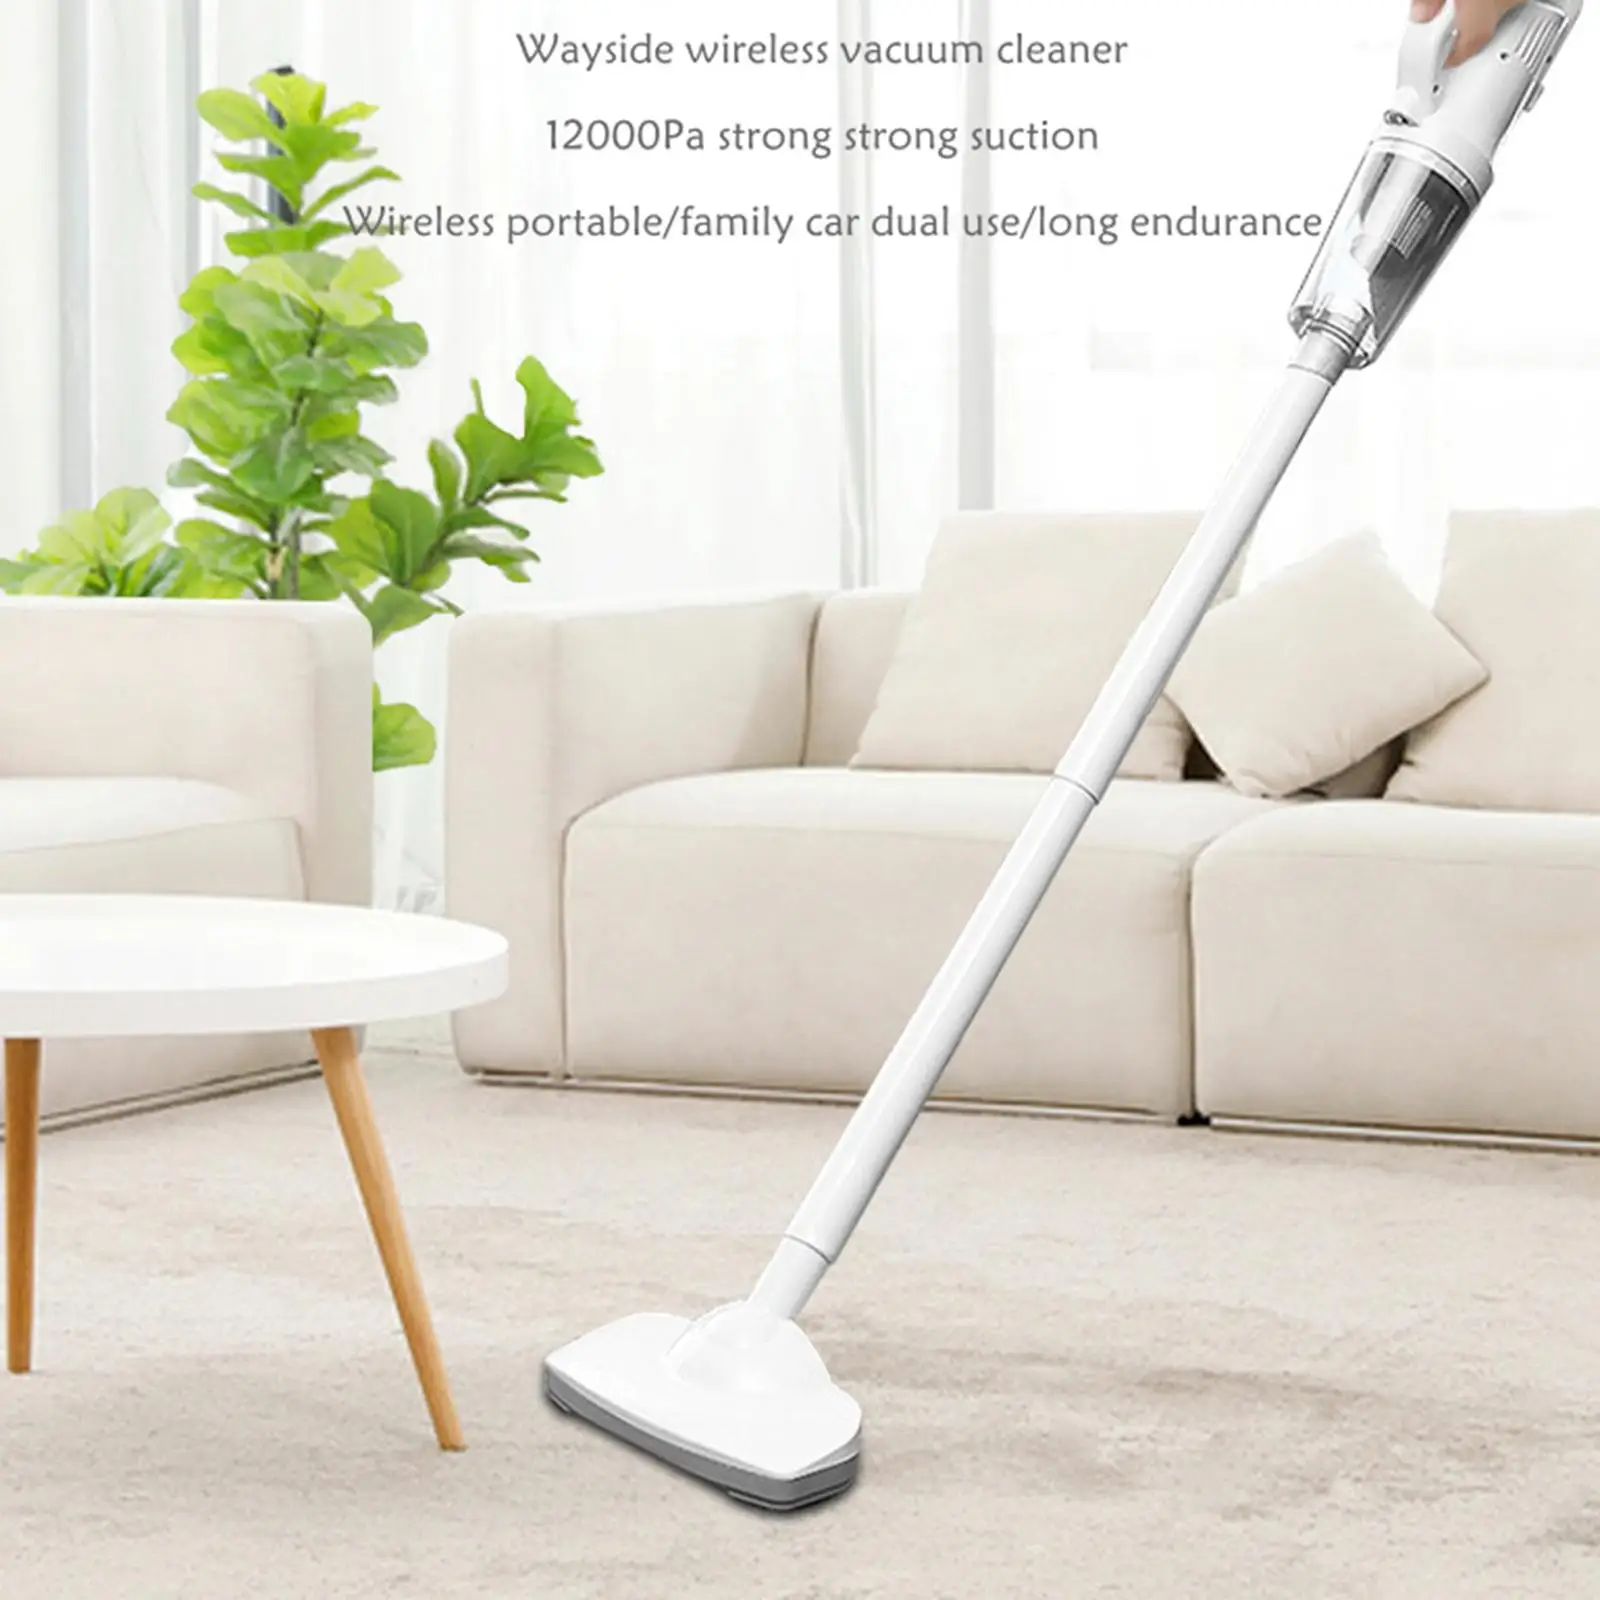   Vacuum Cleaner Detachable with LED Light for Office Keyboard Home